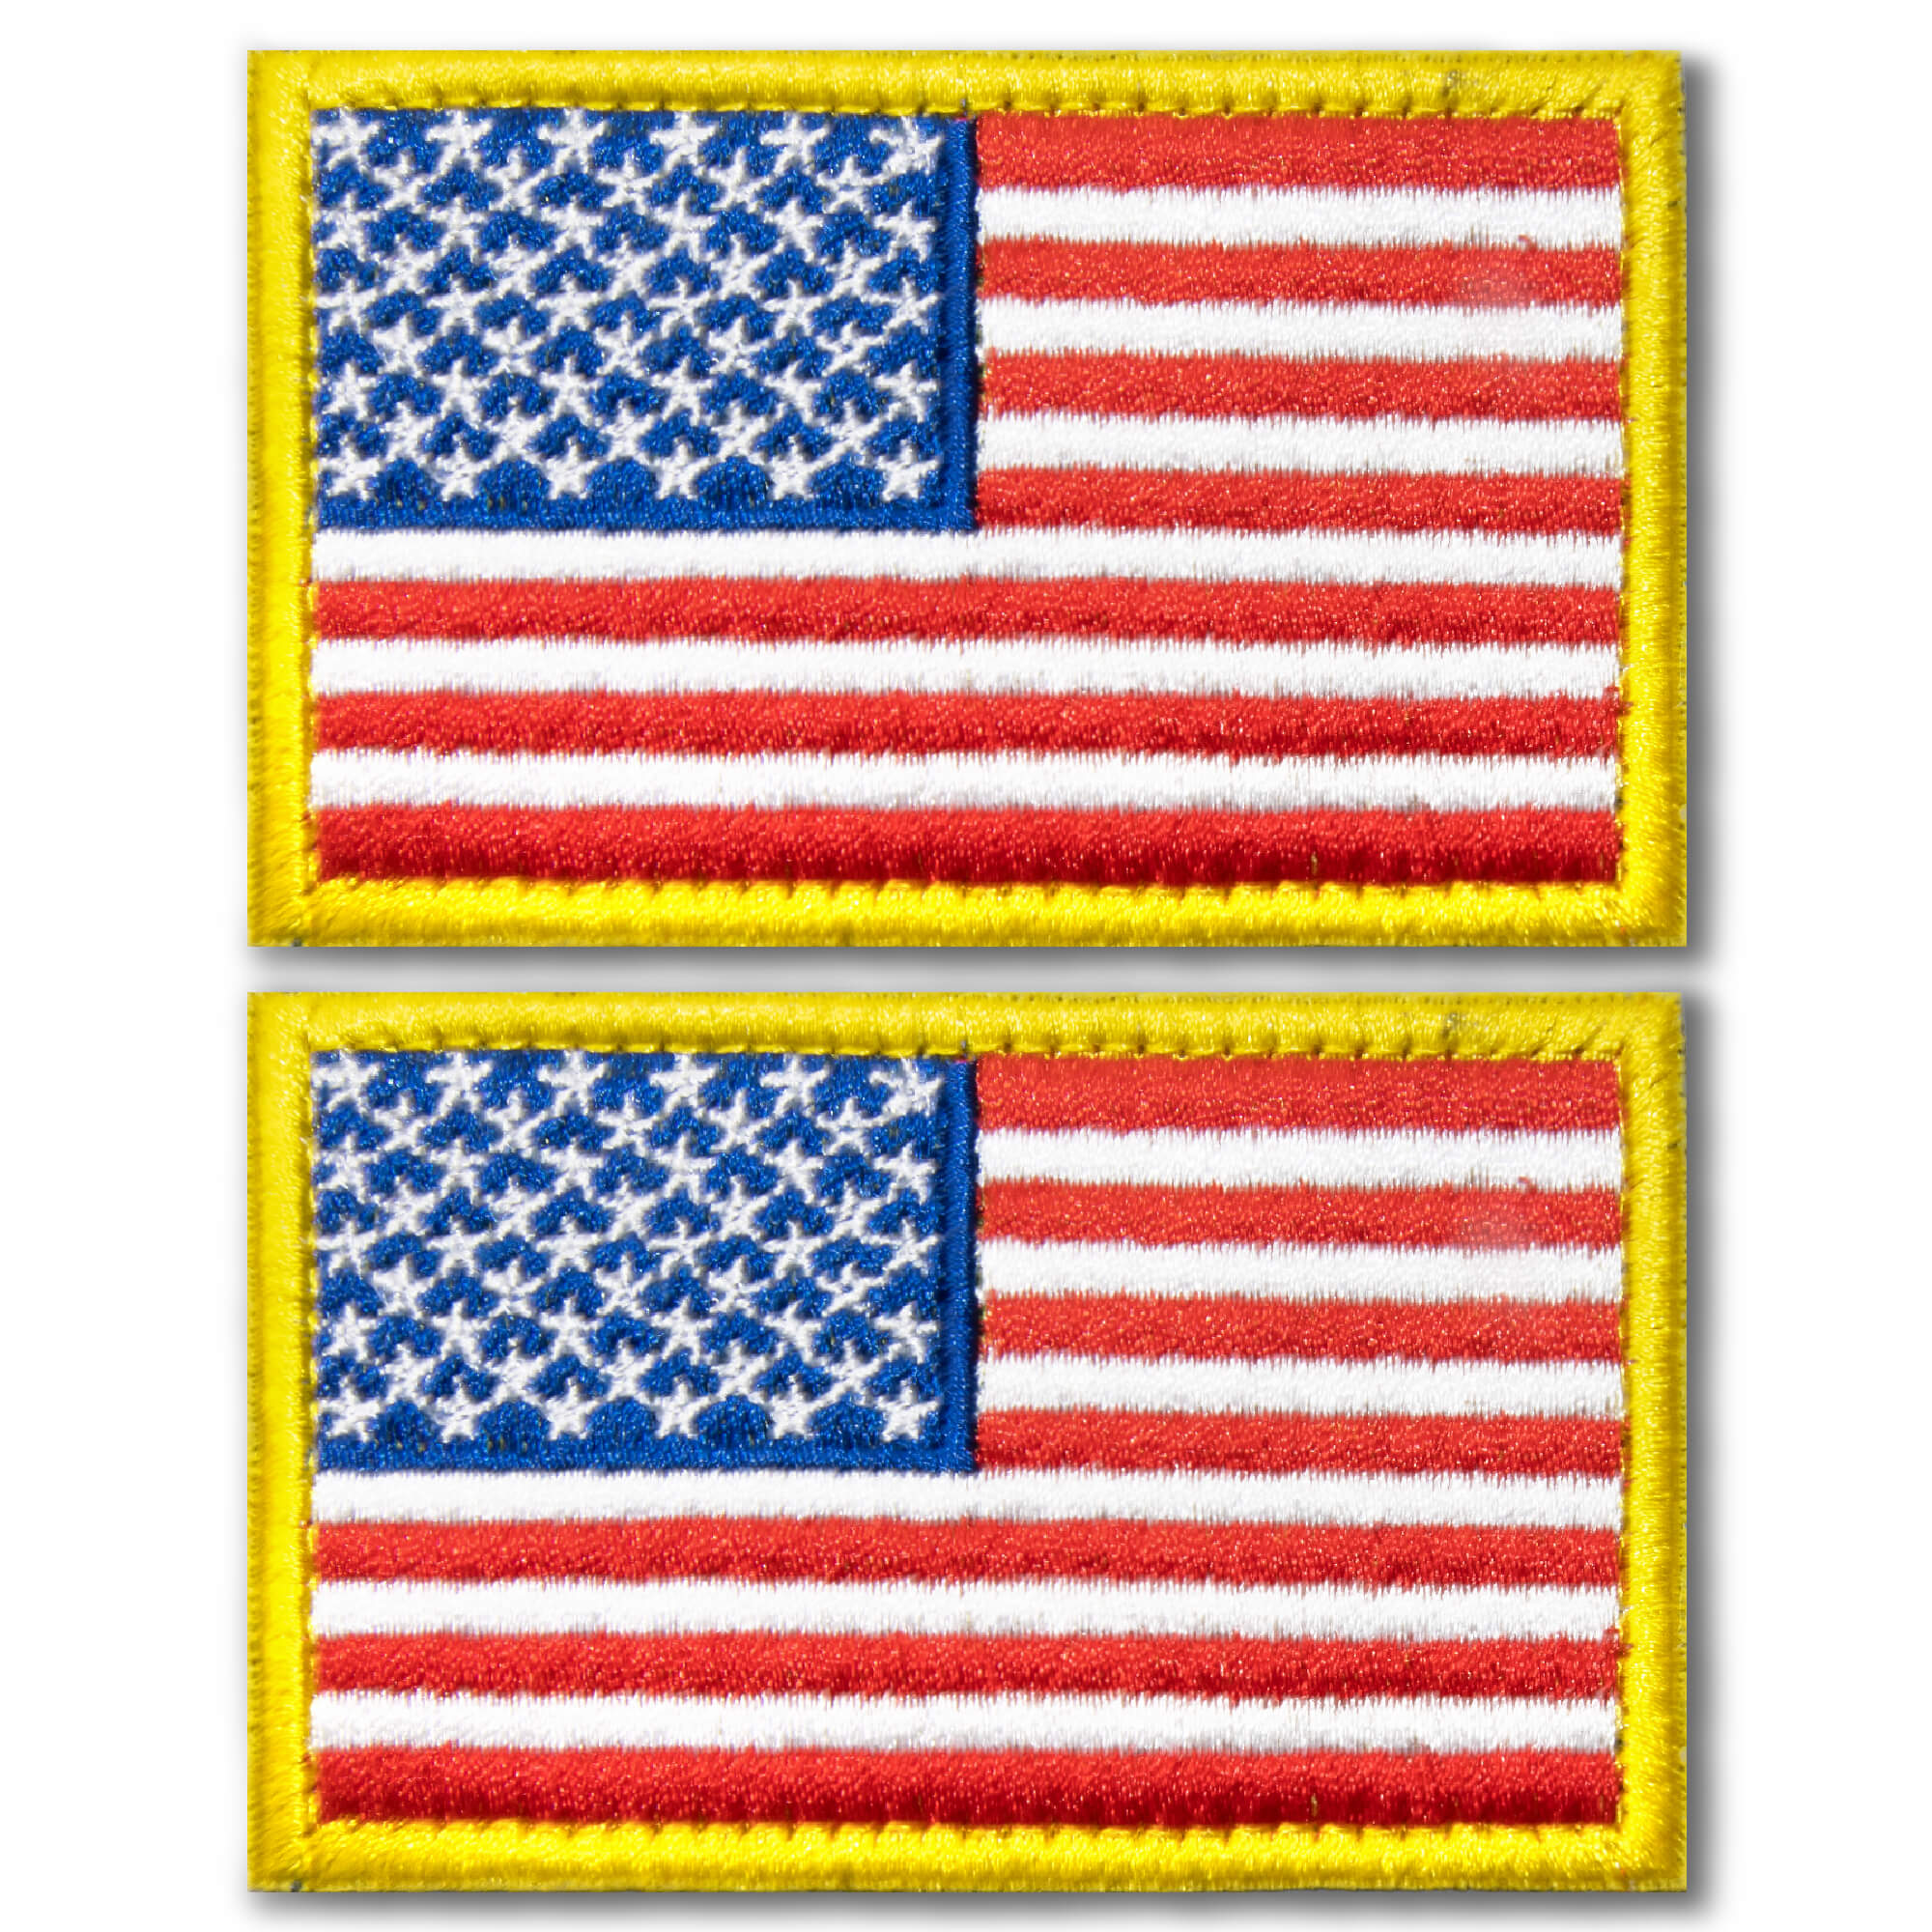 Anley Tactical Mexico Flag Embroidered Patches (2 Pack) - 2x 3 Mexican  Flag Military Uniform Sew On Emblem Patch